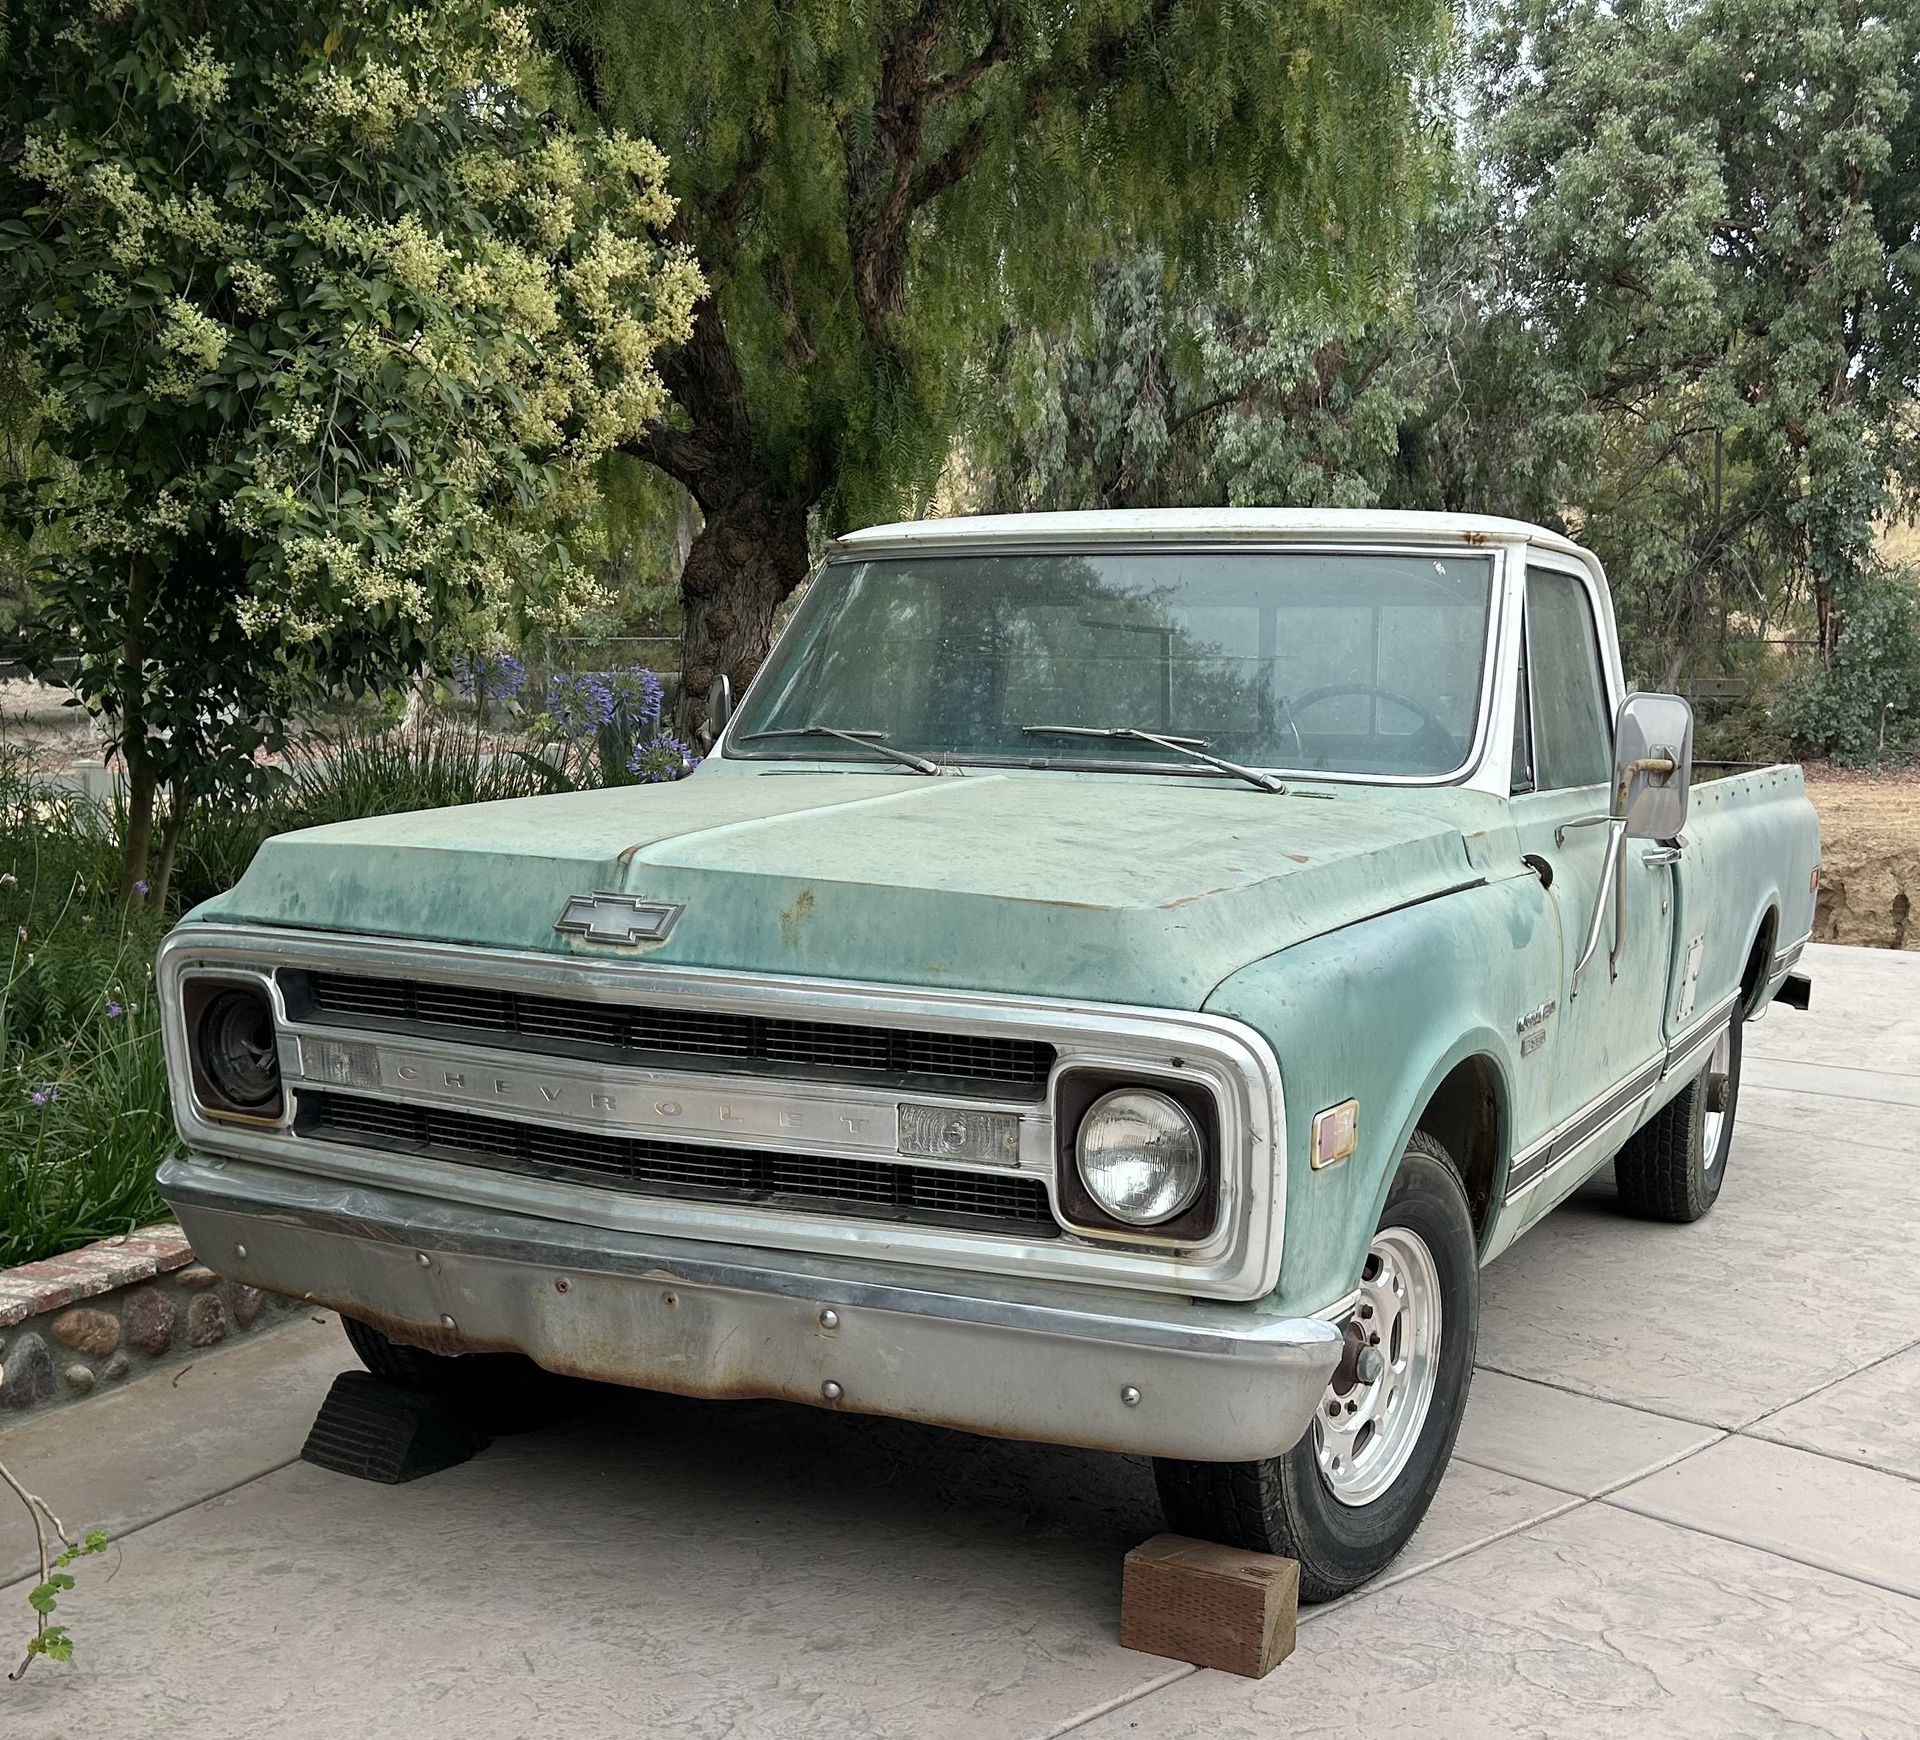 1970 Chevy C-20 With Original Build Sheet. Lots Of New Parts